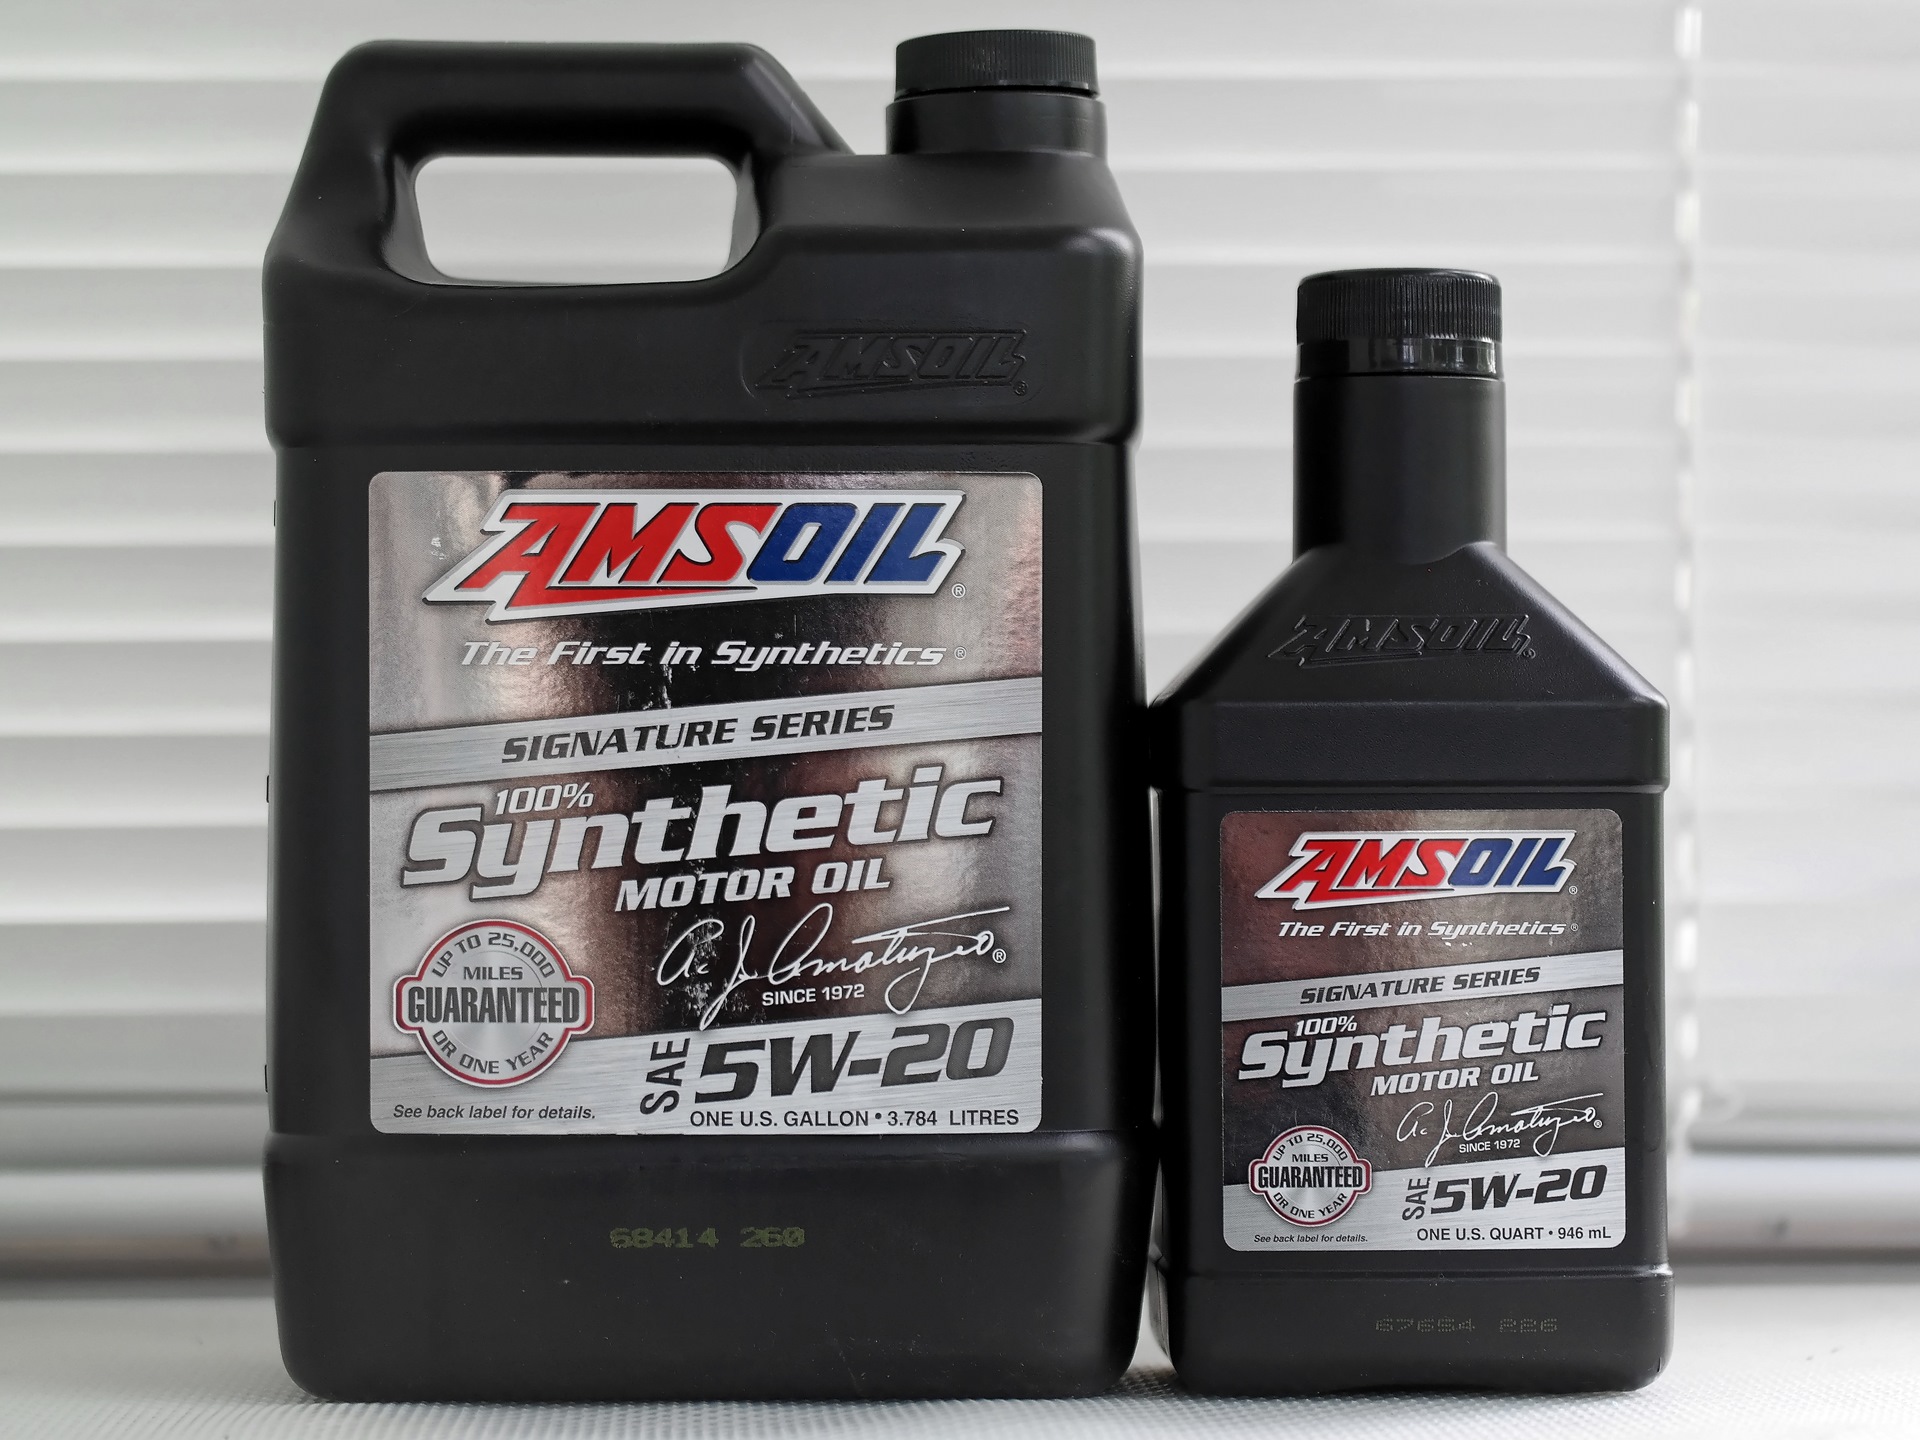 Signature series synthetic. AMSOIL 5w20. AMSOIL 5w20 артикул. AMSOIL Signature Series 5w-30. AMSOIL Signature Series Synthetic Motor Oil 5w-30.